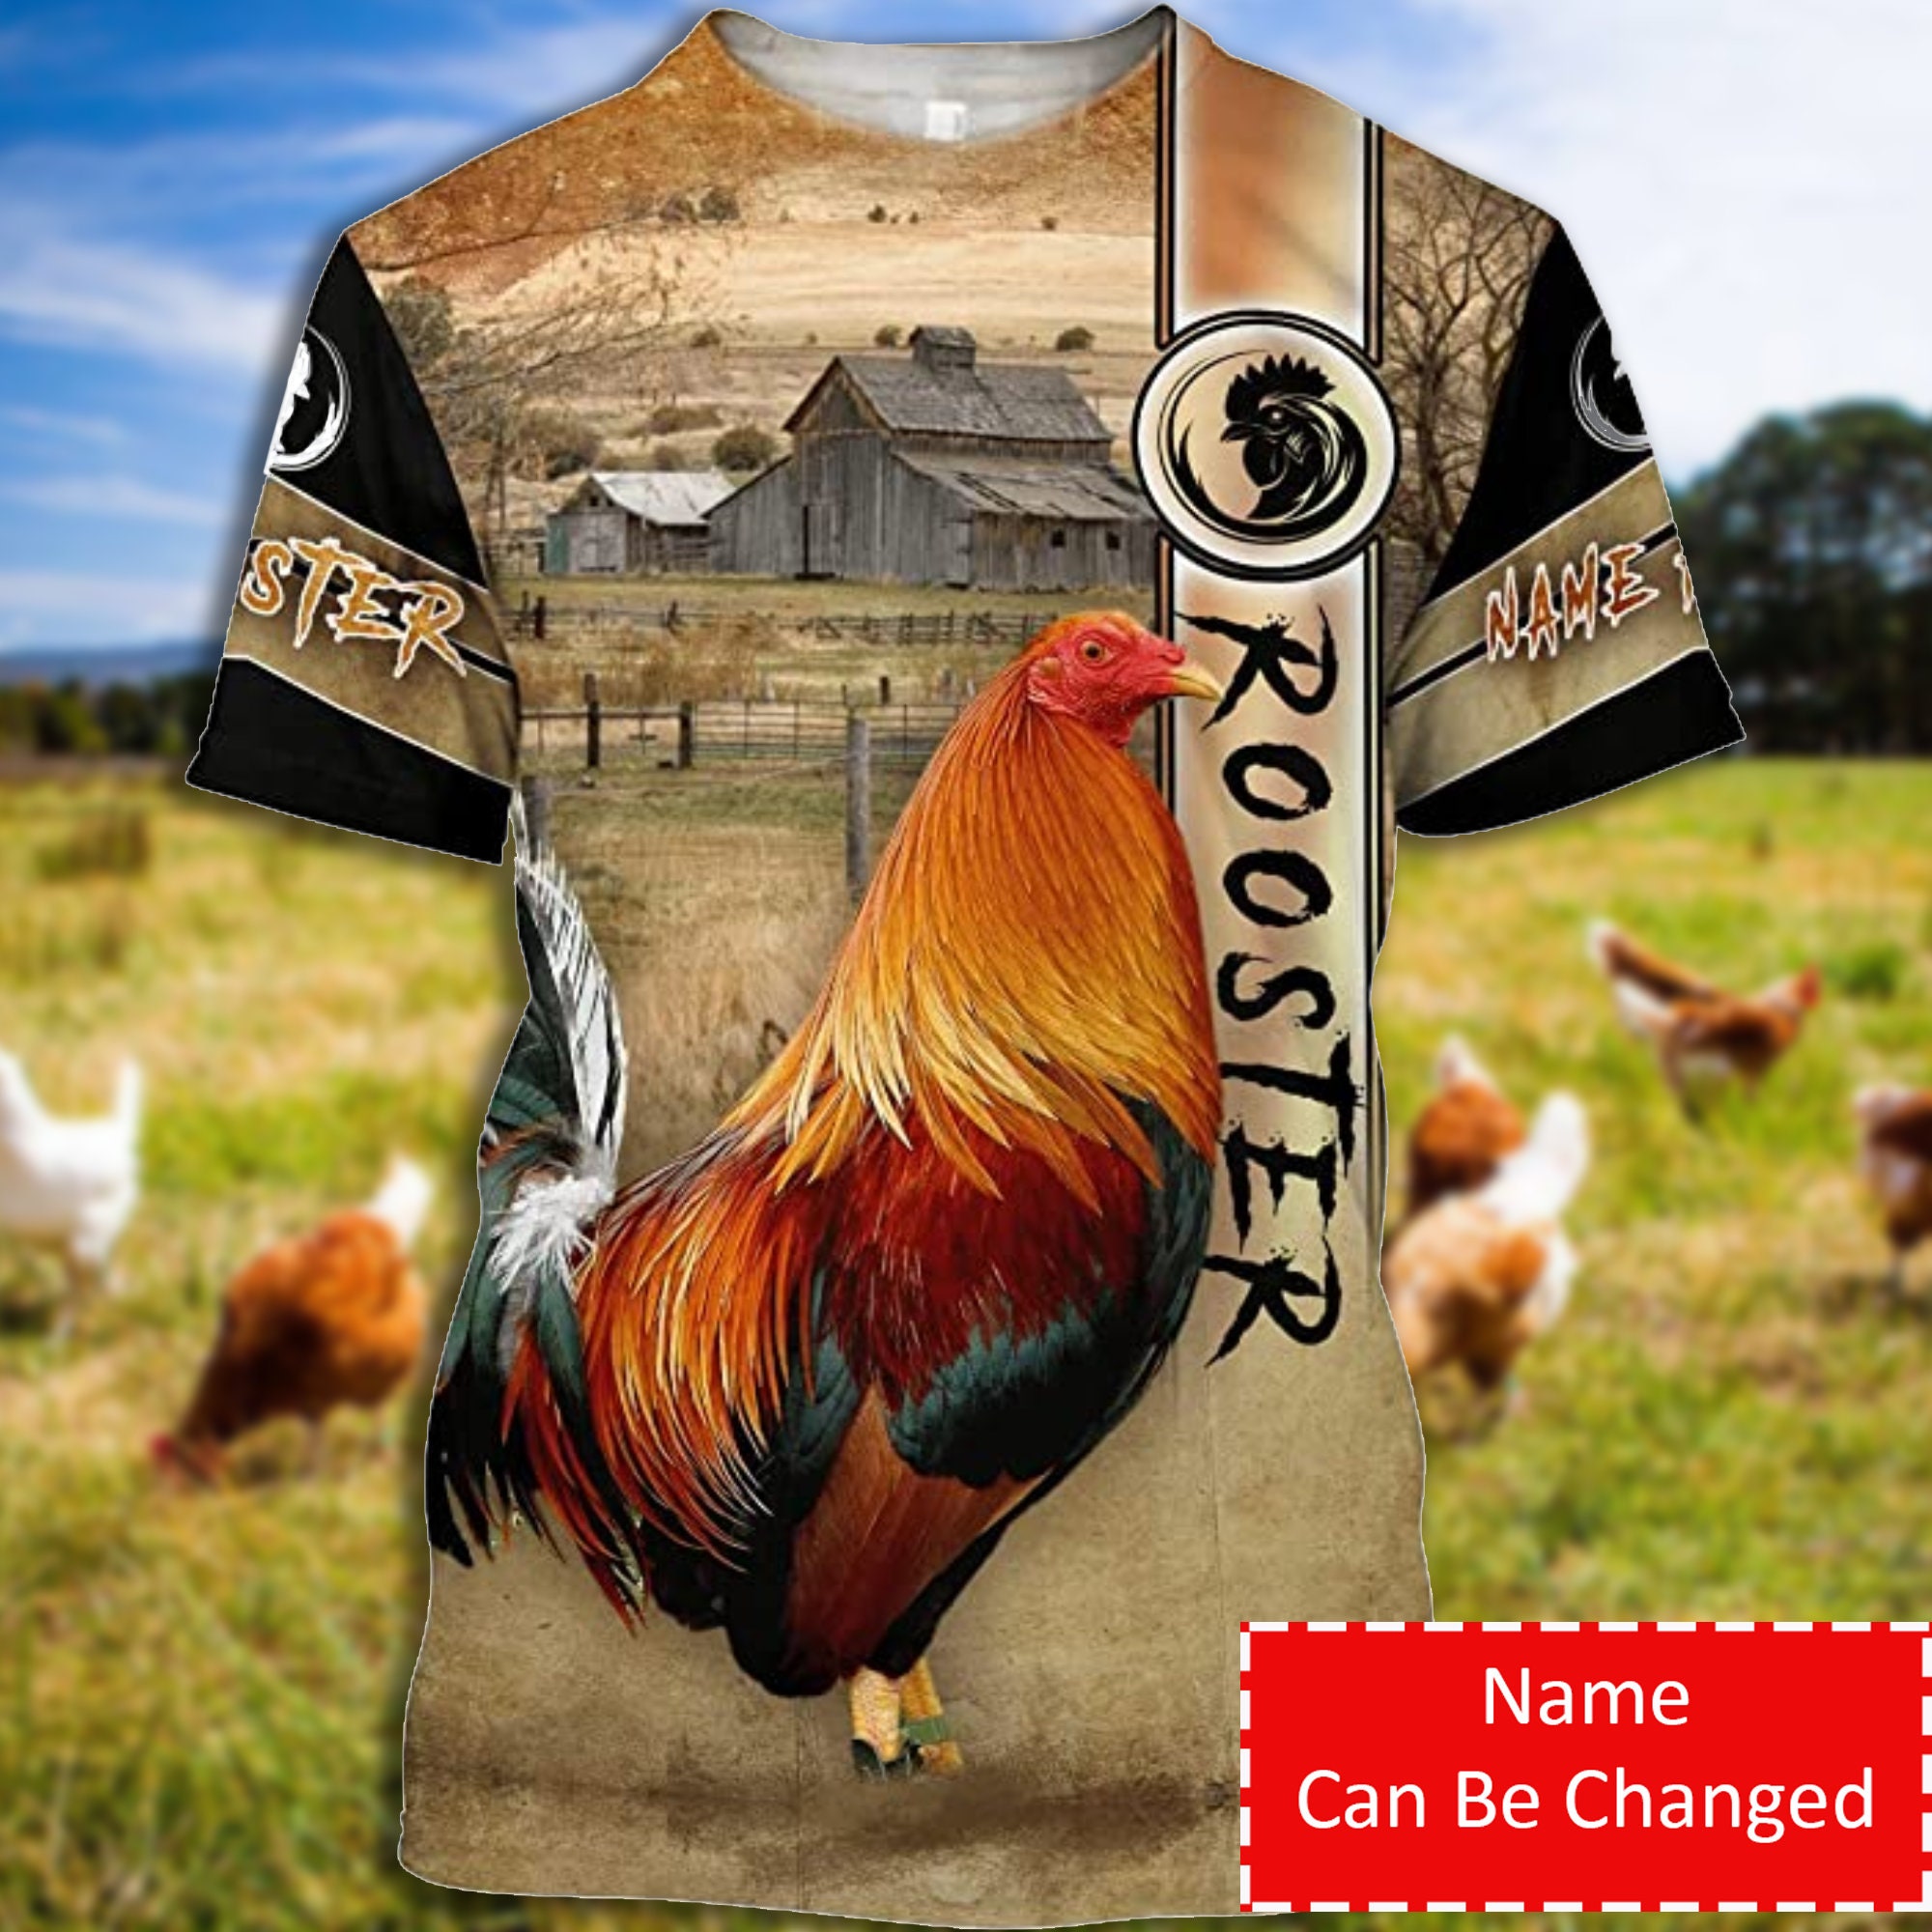 Personalized King Rooster T-shirt, Custom Name King Rooster Shirt, Gift For Rooster Lovers, Father's Day Gift, Rooster Shirt For Him